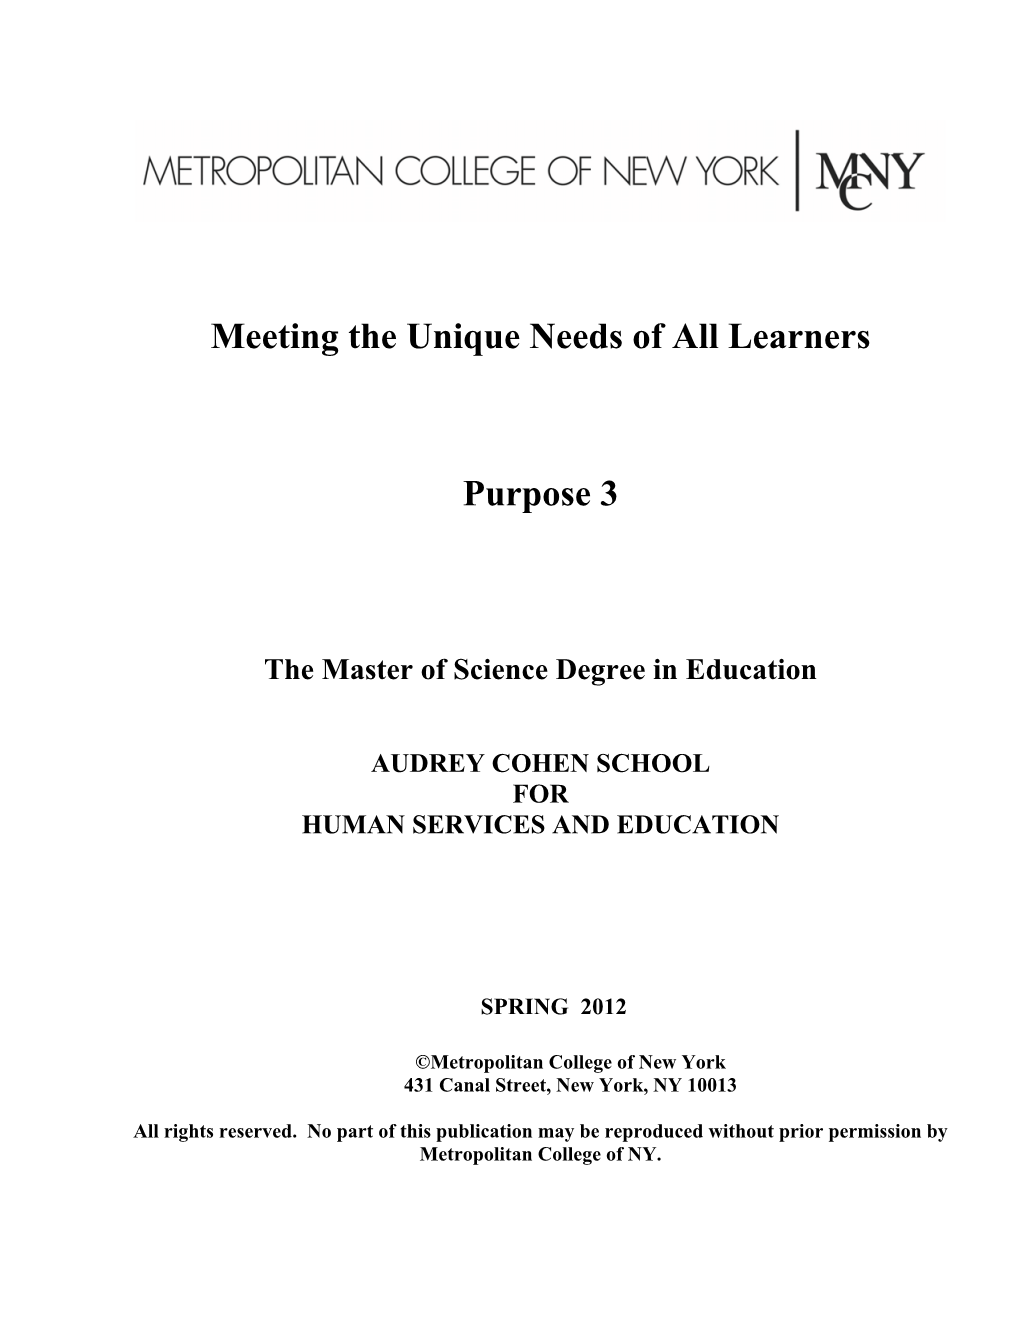 Meeting the Unique Needs of All Learners Purpose 3